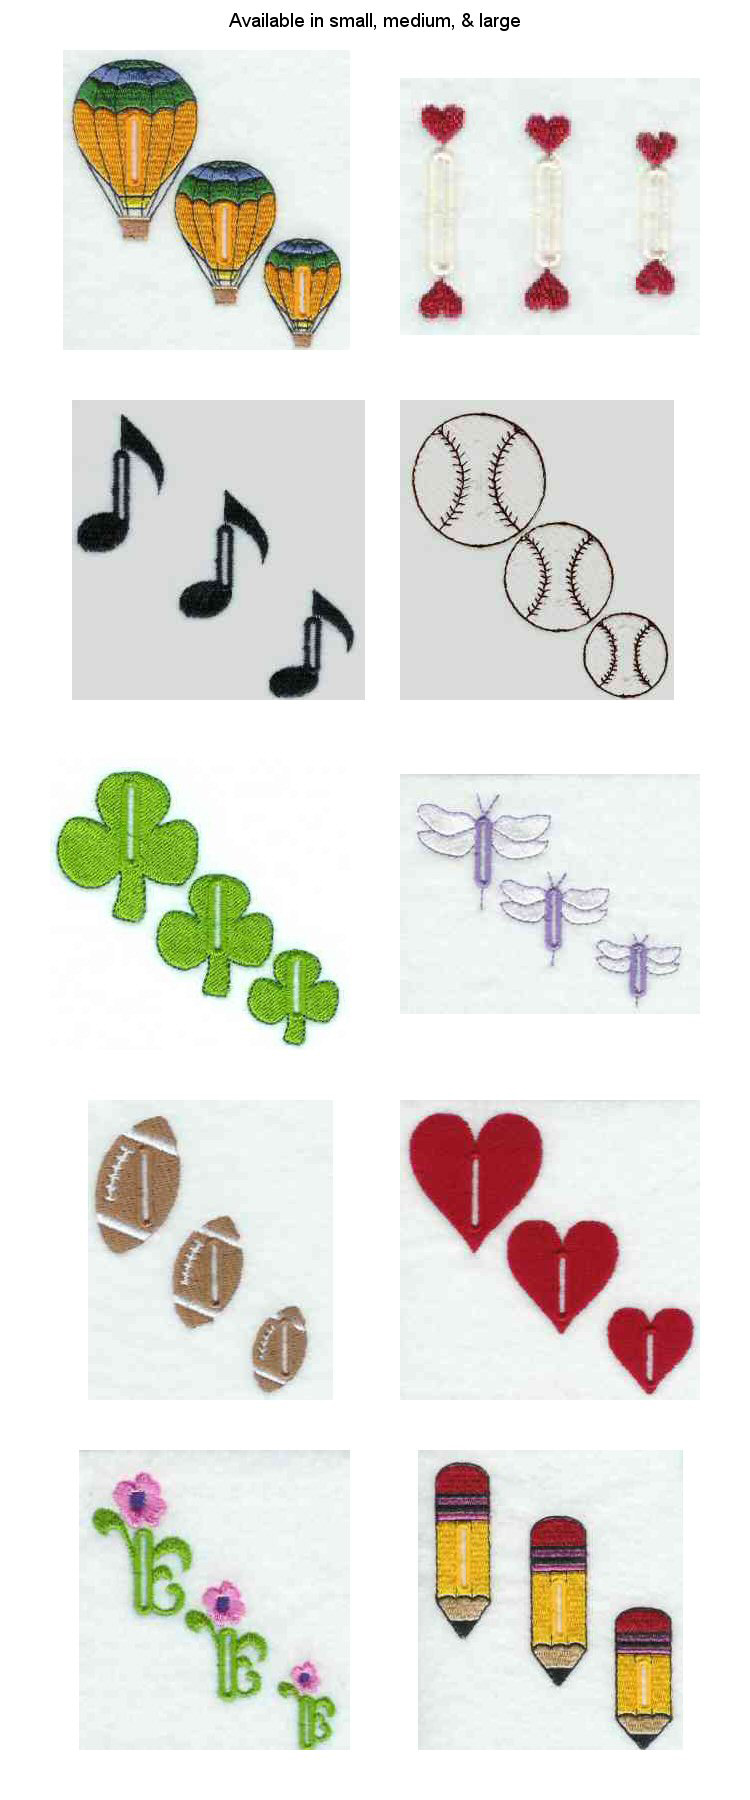 Variety Buttonholes Embroidery Machine Design Details